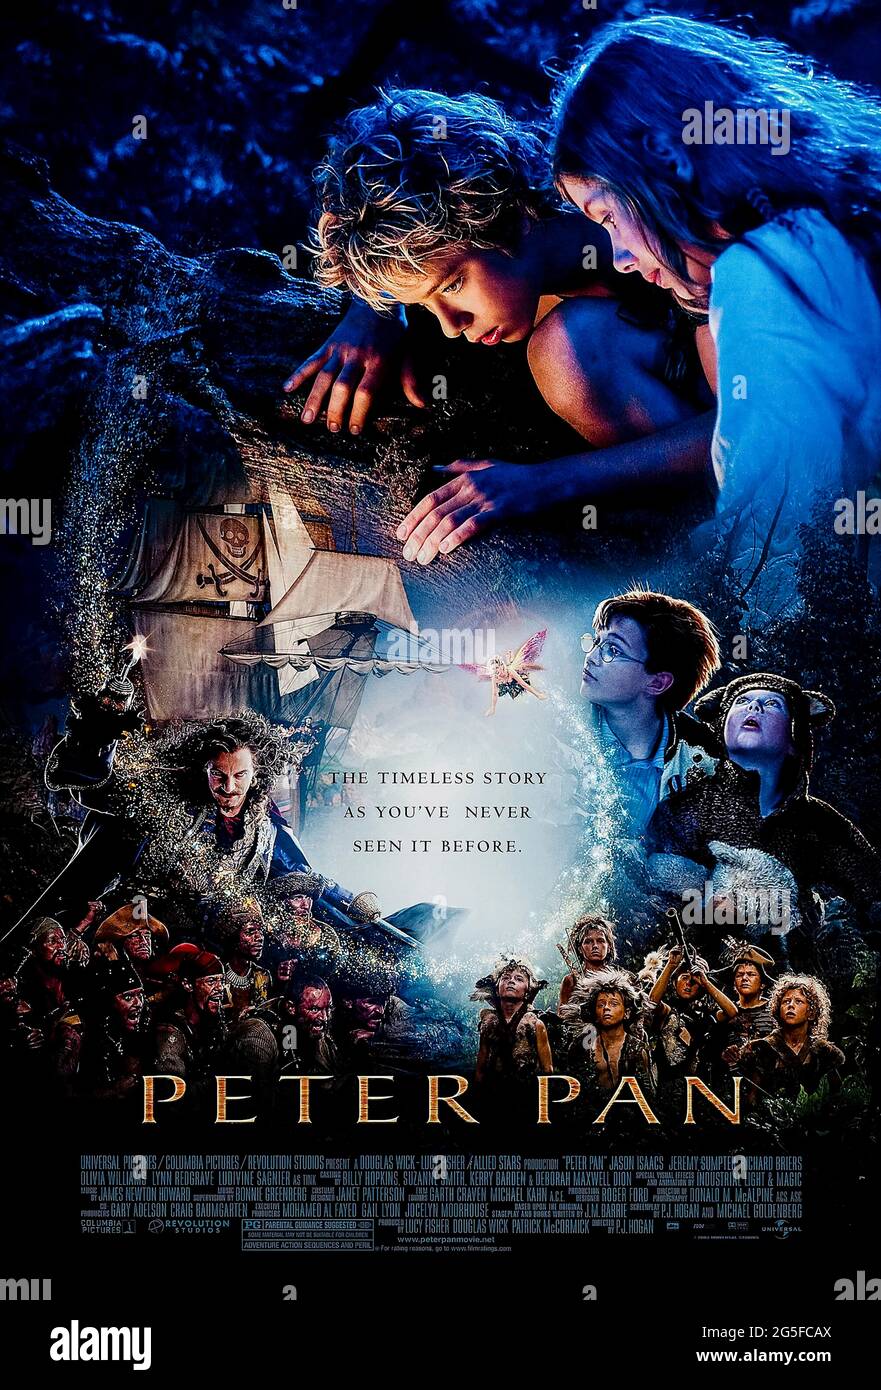 Peter Pan (2003) directed by P.J. Hogan and starring Jeremy Sumpter, Jason Isaacs, Olivia Williams and Rachel Hurd-Wood. Faithful adaptation of J.M. Barrie's much loved play about Wendy and her brothers journey to Neverland with Peter Pan to battle with his nemesis Captain Hook. Stock Photo